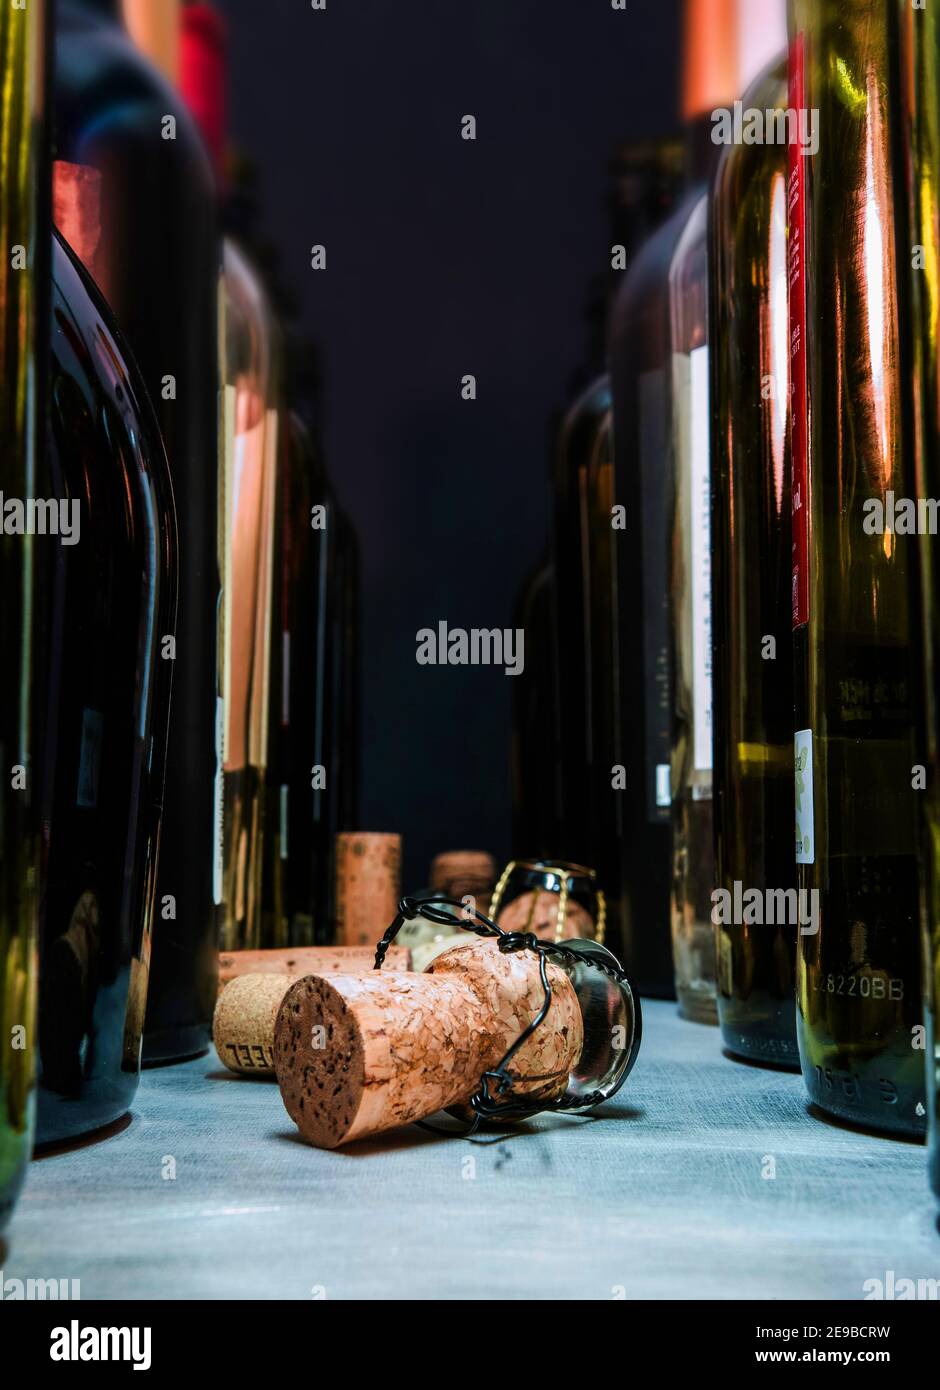 A perspective view of two rows of open wine bottles, corkscrews and corks. Low key. Stock Photo